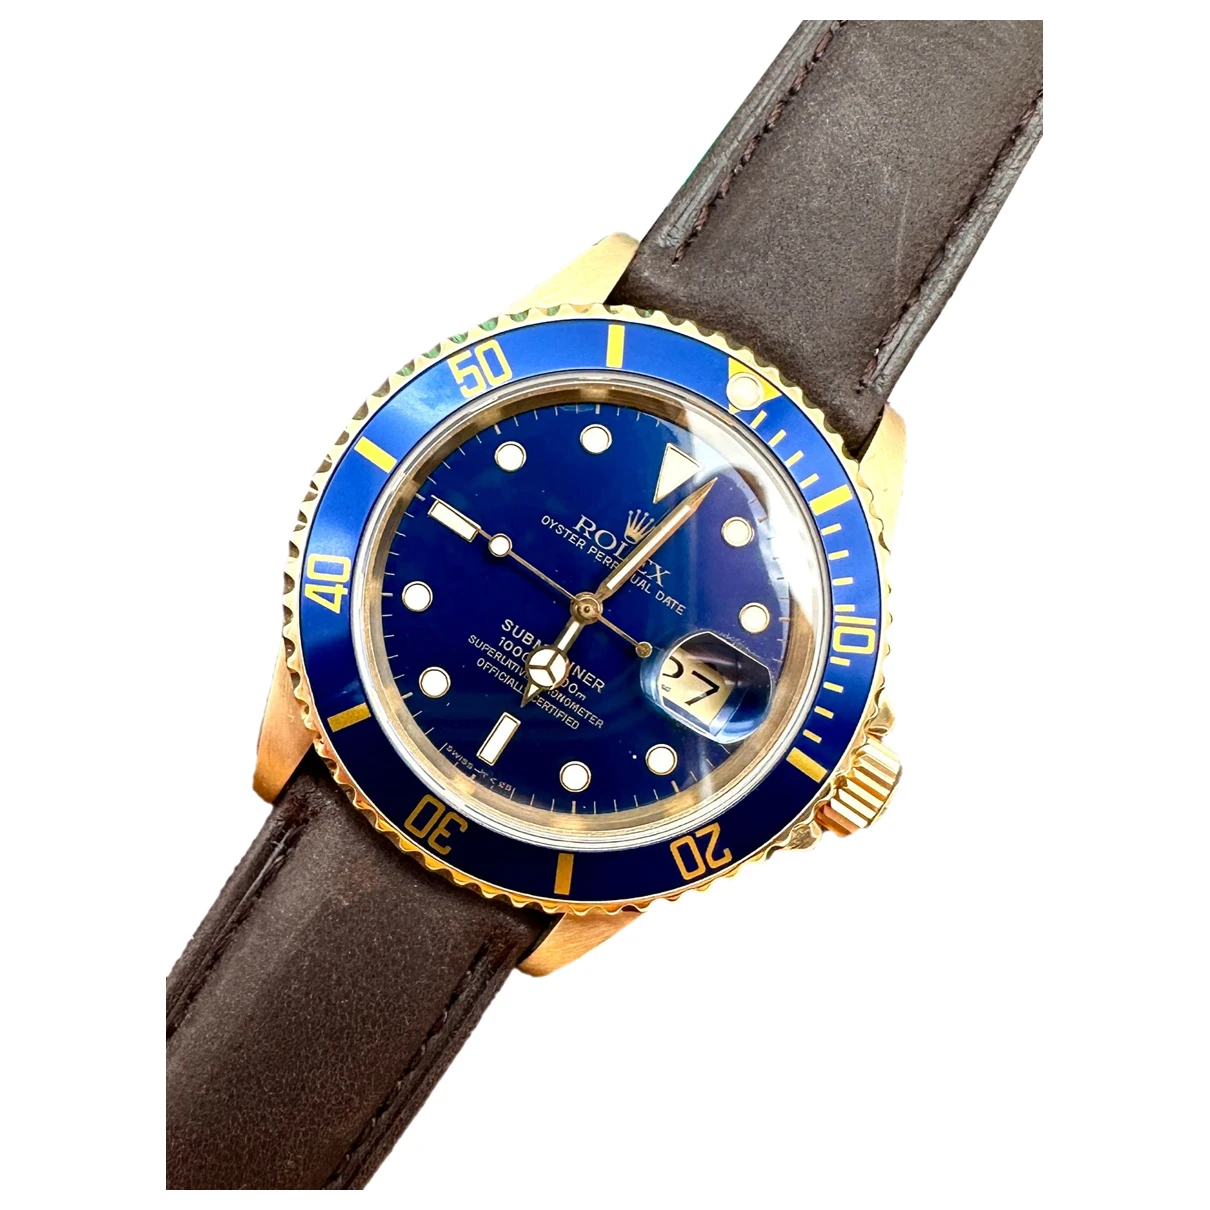 Pre-owned Rolex Submariner Gold Watch In Blue